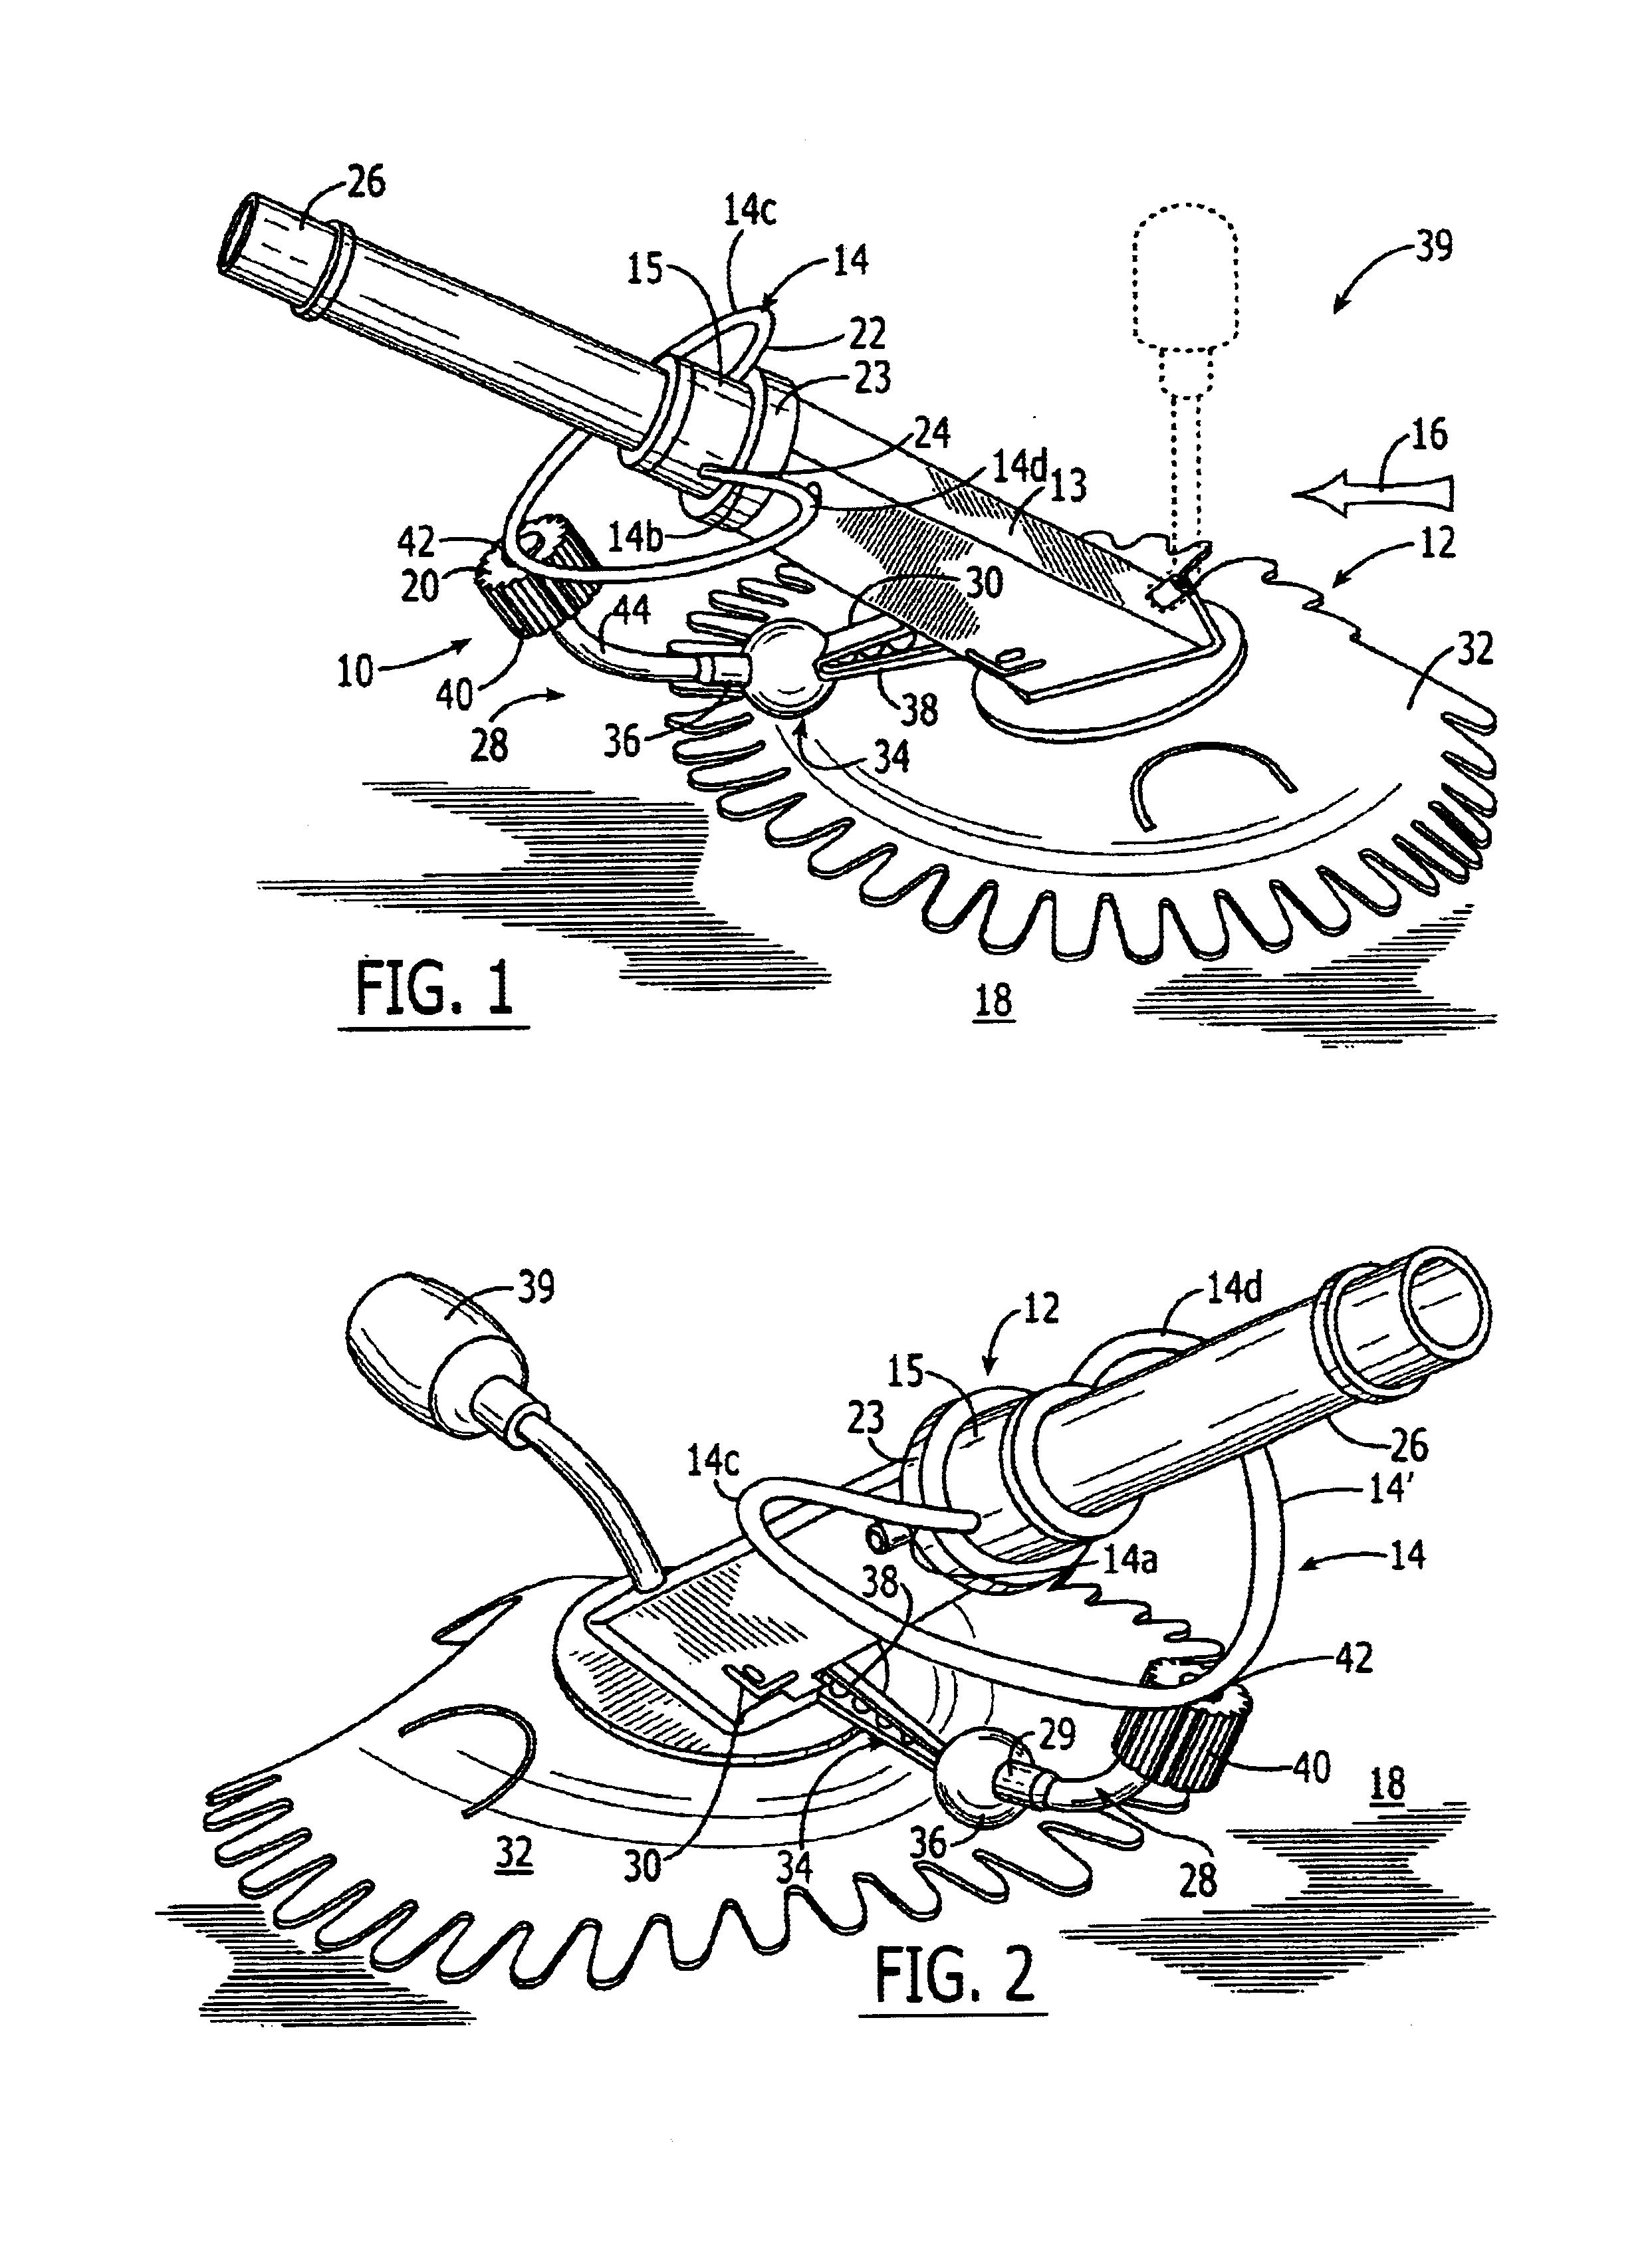 Device for dislodging a submersible pool cleaner